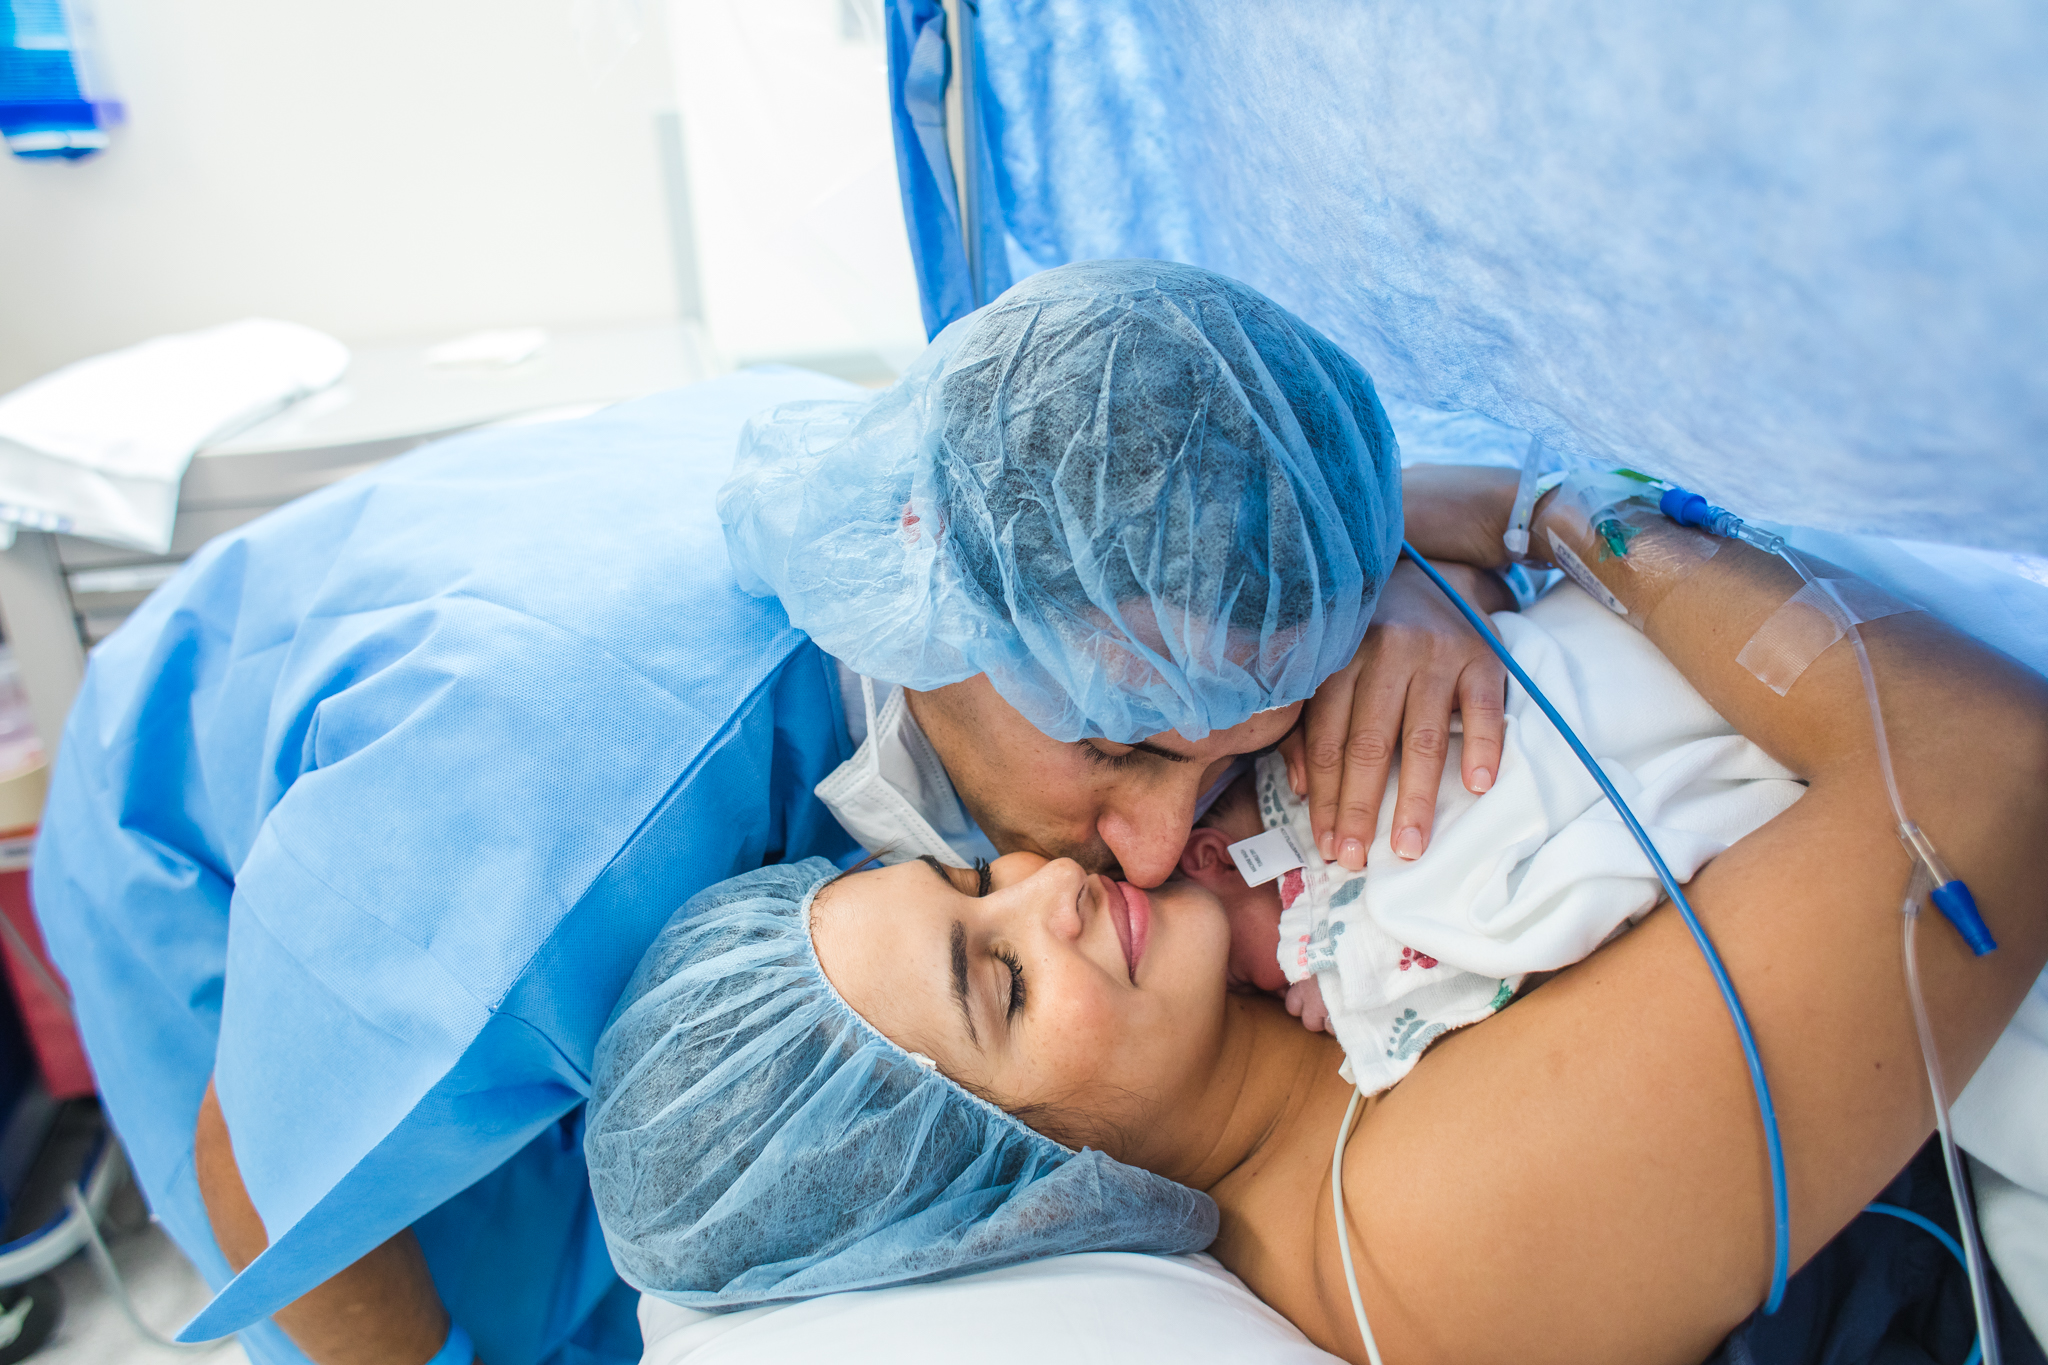 delayed cord clamping cord blood banking csection.jpg